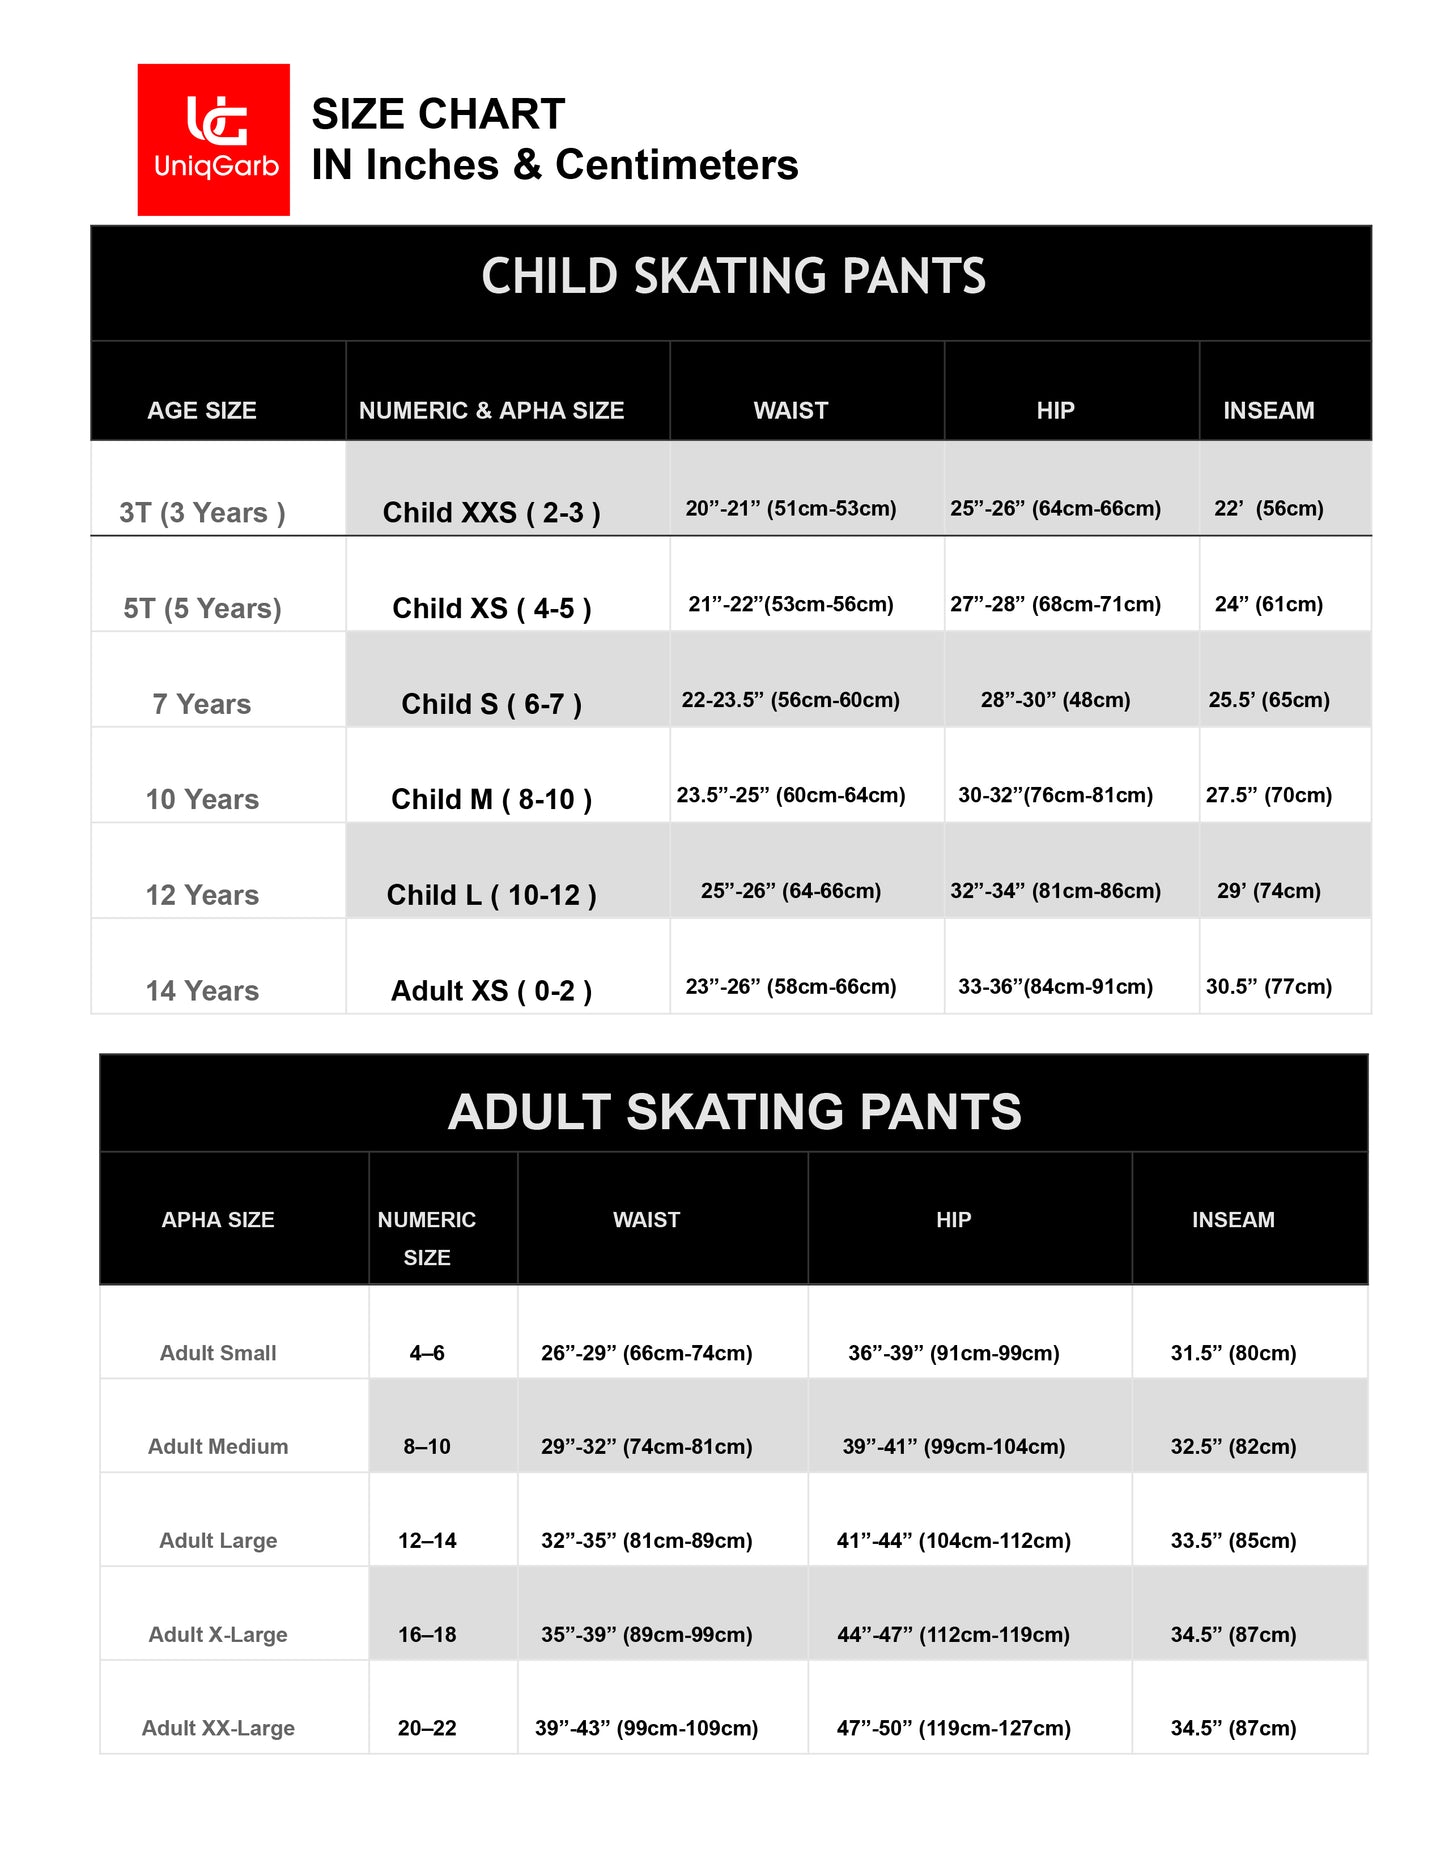 Polartec Ice Figure Skating Pants for girls fleece ice skating leggings for women with Rhinestone Crystal SNOW ANGLE UGSP39 - Secured ELASTIC cuff